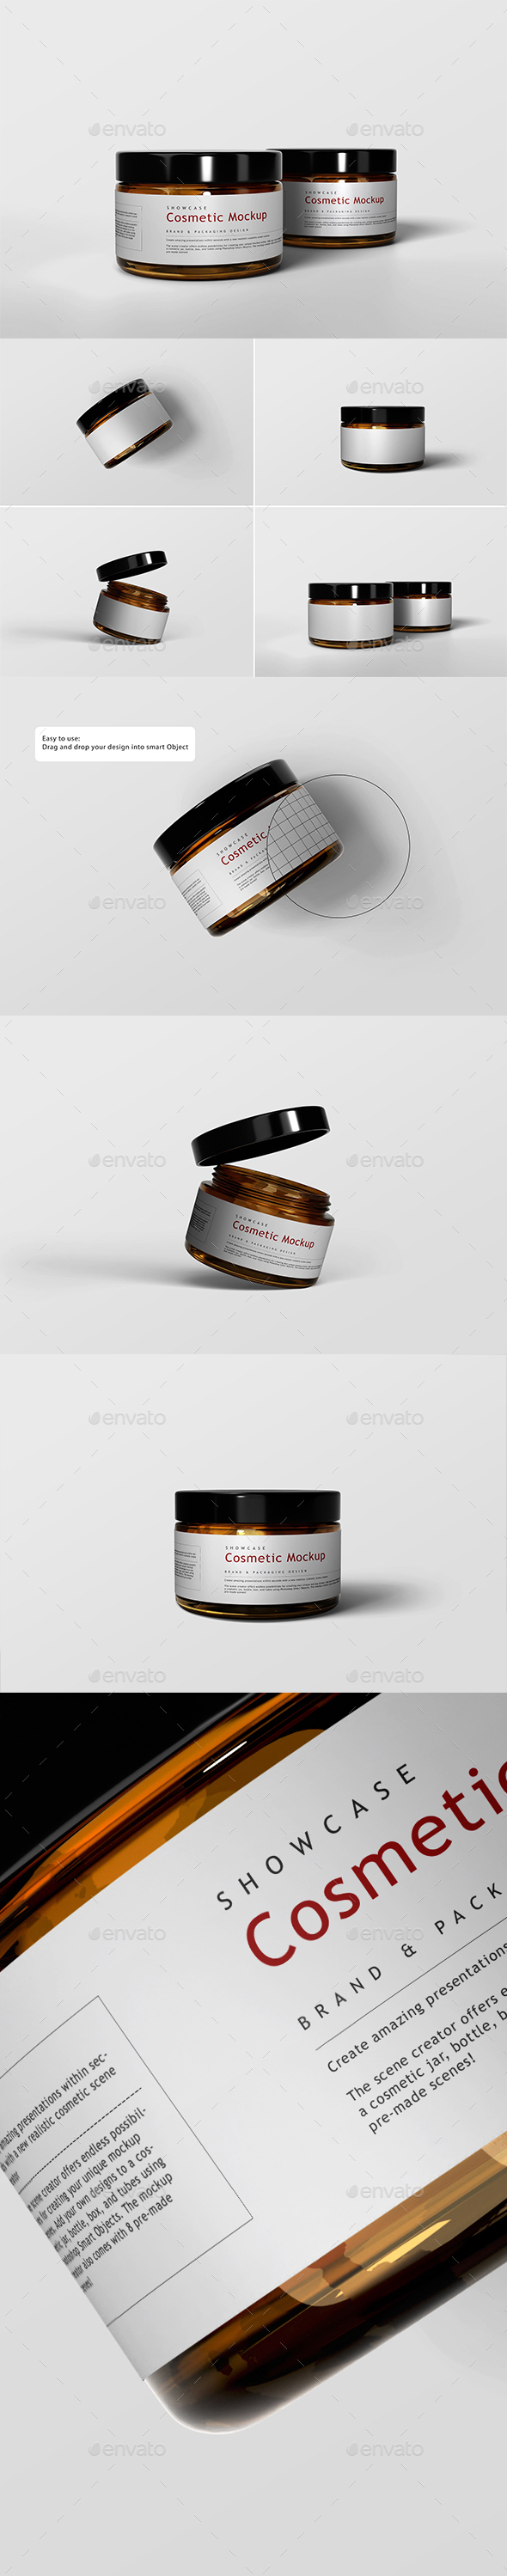 [DOWNLOAD]Amber Glass Cosmetic Bottle Mockup